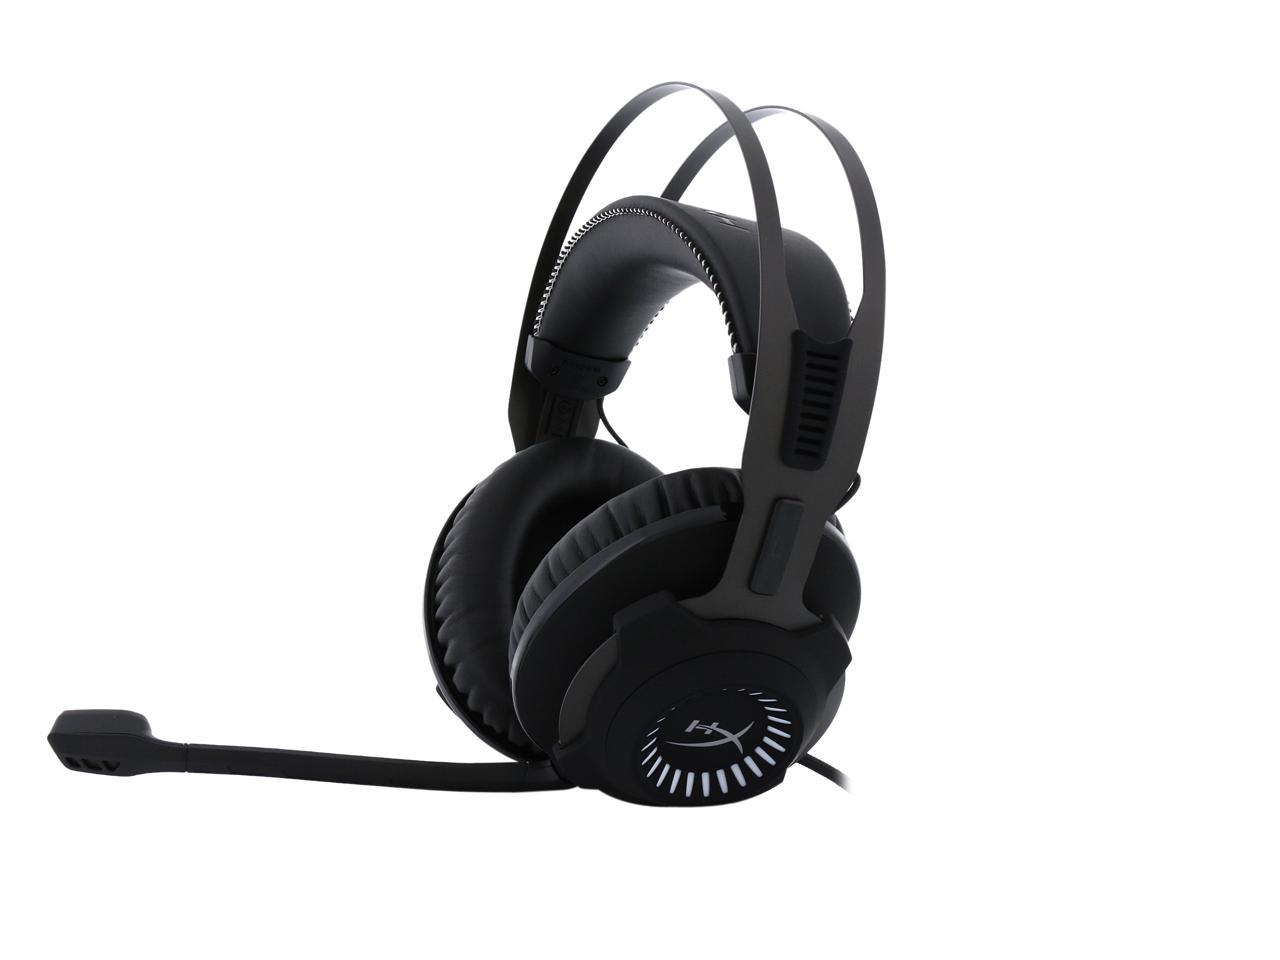 Offer uitdrukken Tegenstander HyperX Cloud Revolver S Gaming Headset with Dolby 7.1 Surround Sound for  PC, PS4, PS4 PRO, Xbox One, Xbox One S - Newegg.com